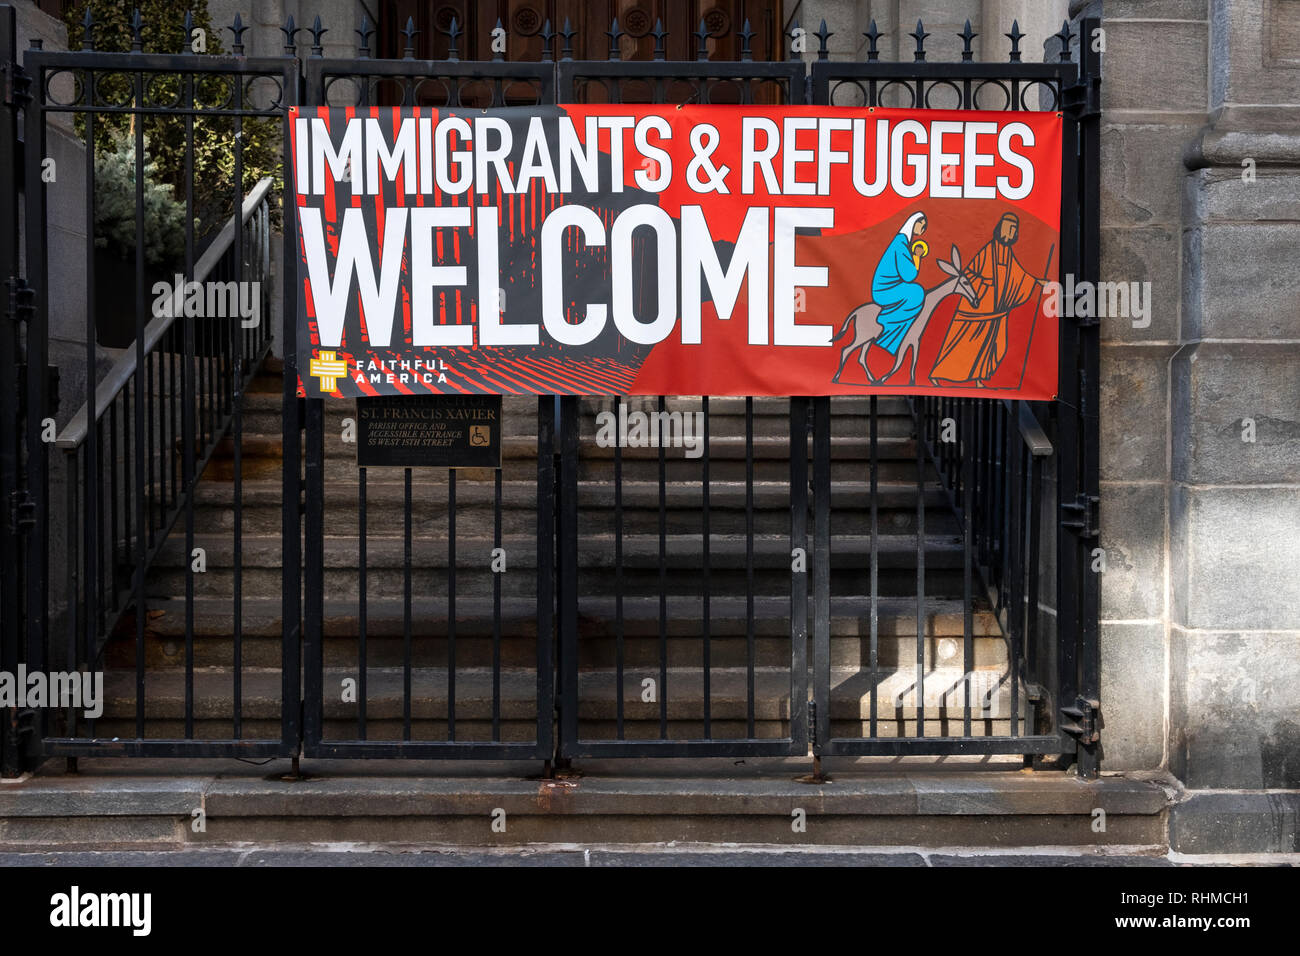 A sign outside St. Francis Xavier church on West 16th Street in Manhattan welcoming refugees and immigrants. Stock Photo